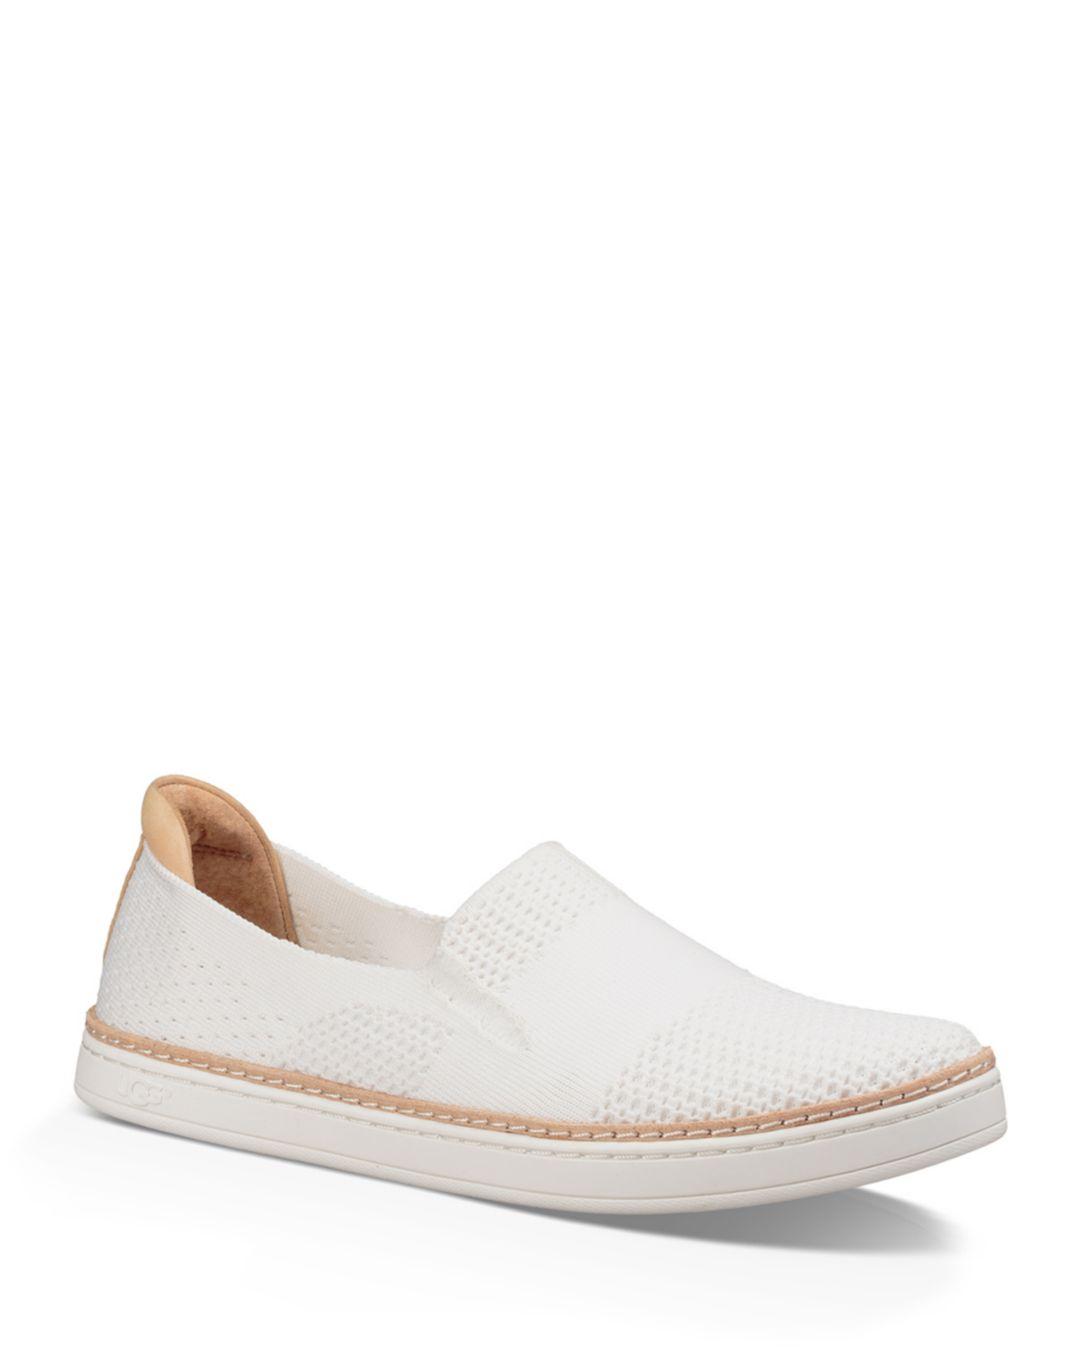 UGG Synthetic Sammy Slip-on Knit Sneakers in White - Save 76% - Lyst